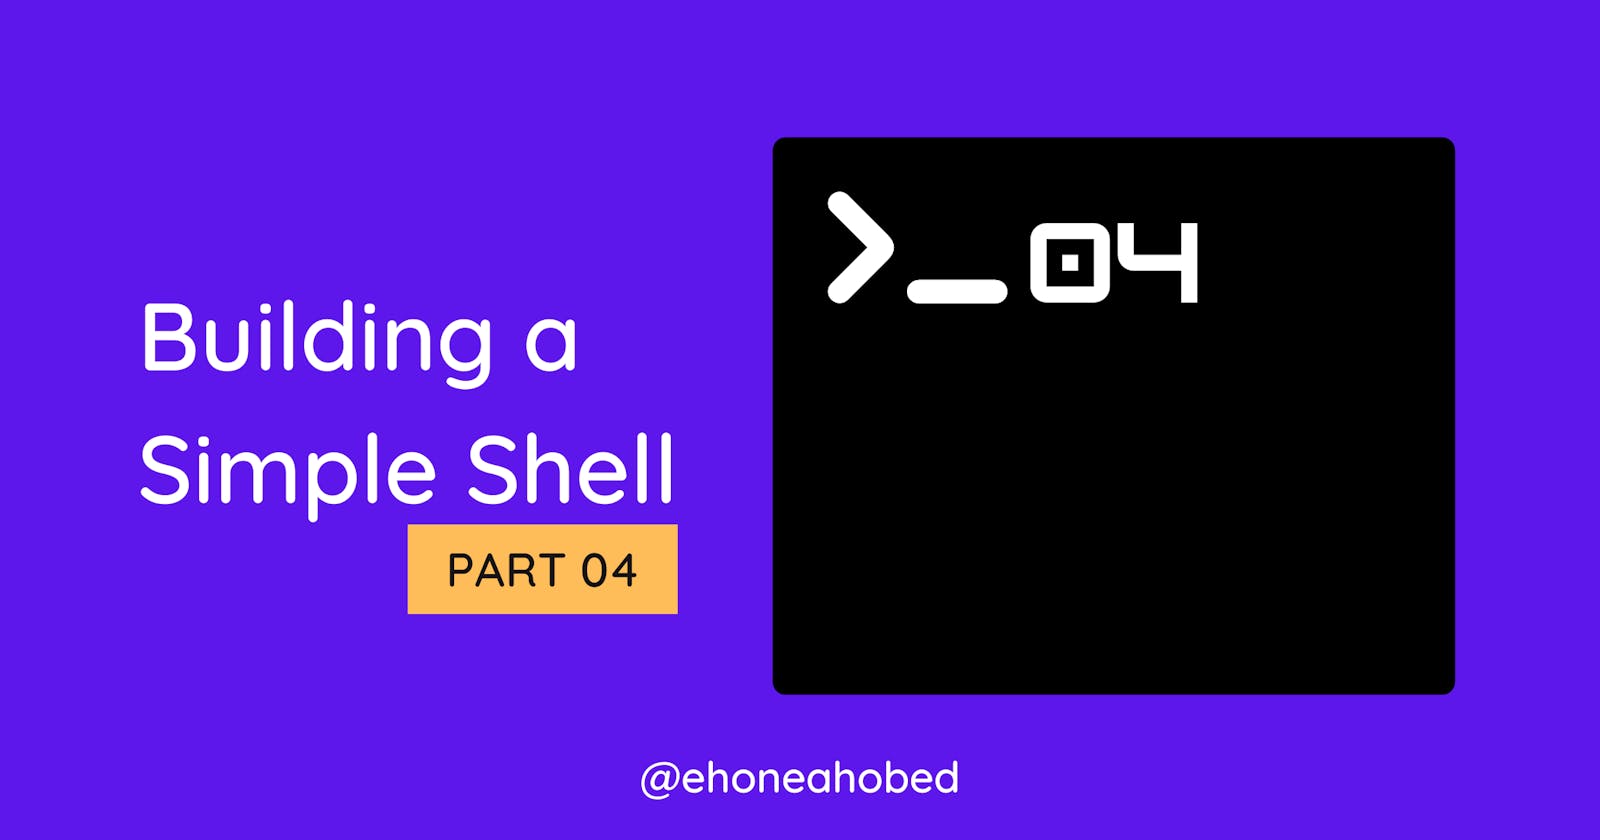 Building a simple shell in C - Part 4